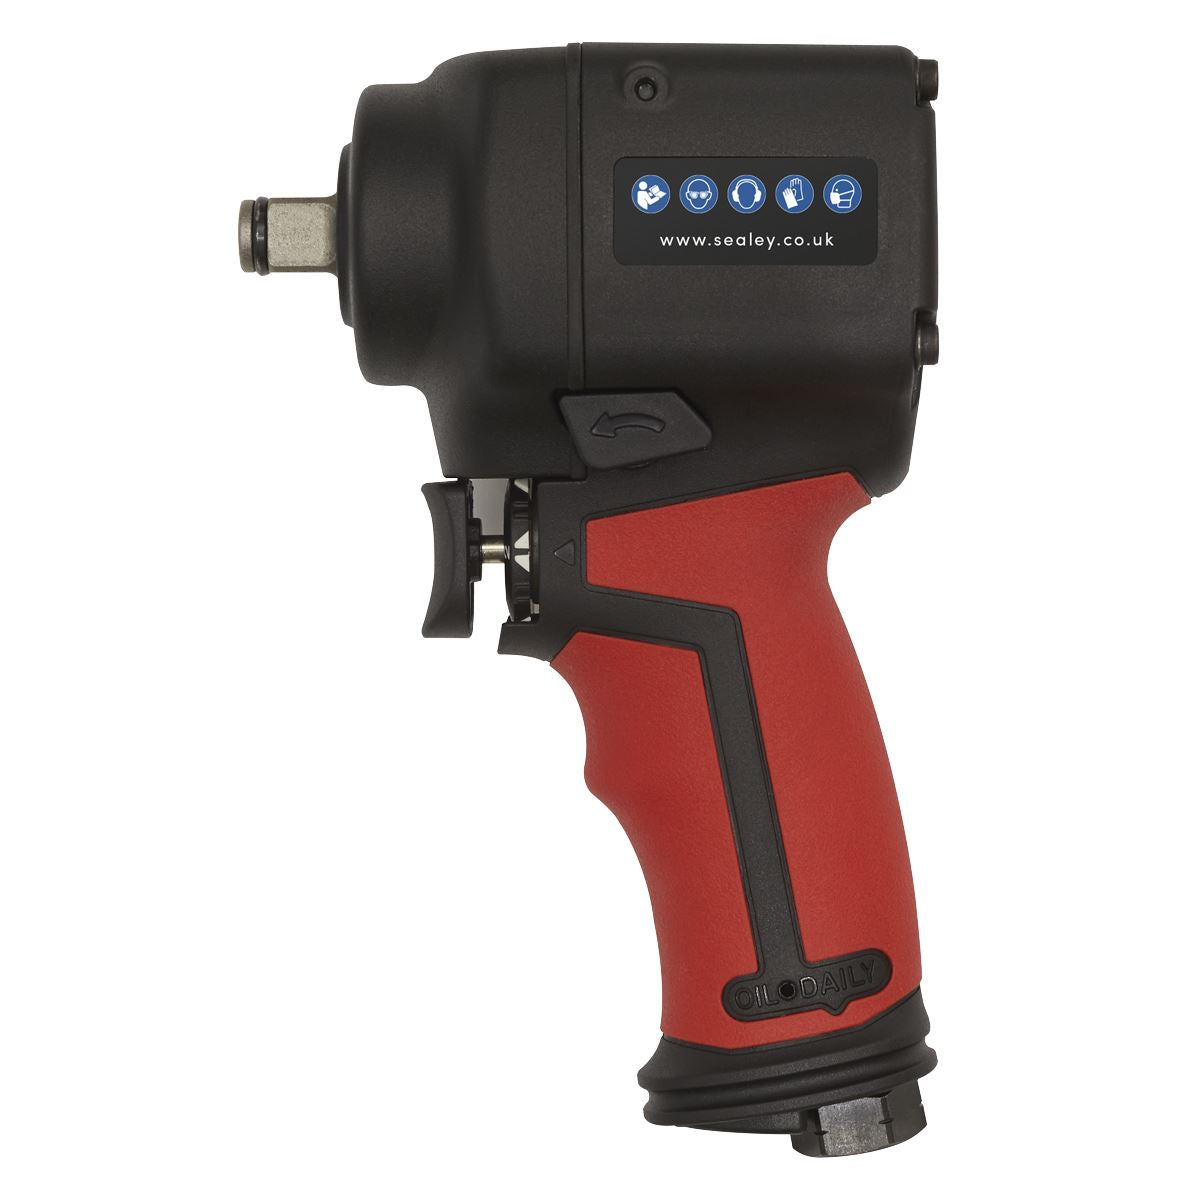 Sealey Premier Air Impact Wrench 1/2"Sq Drive Stubby - Twin Hammer